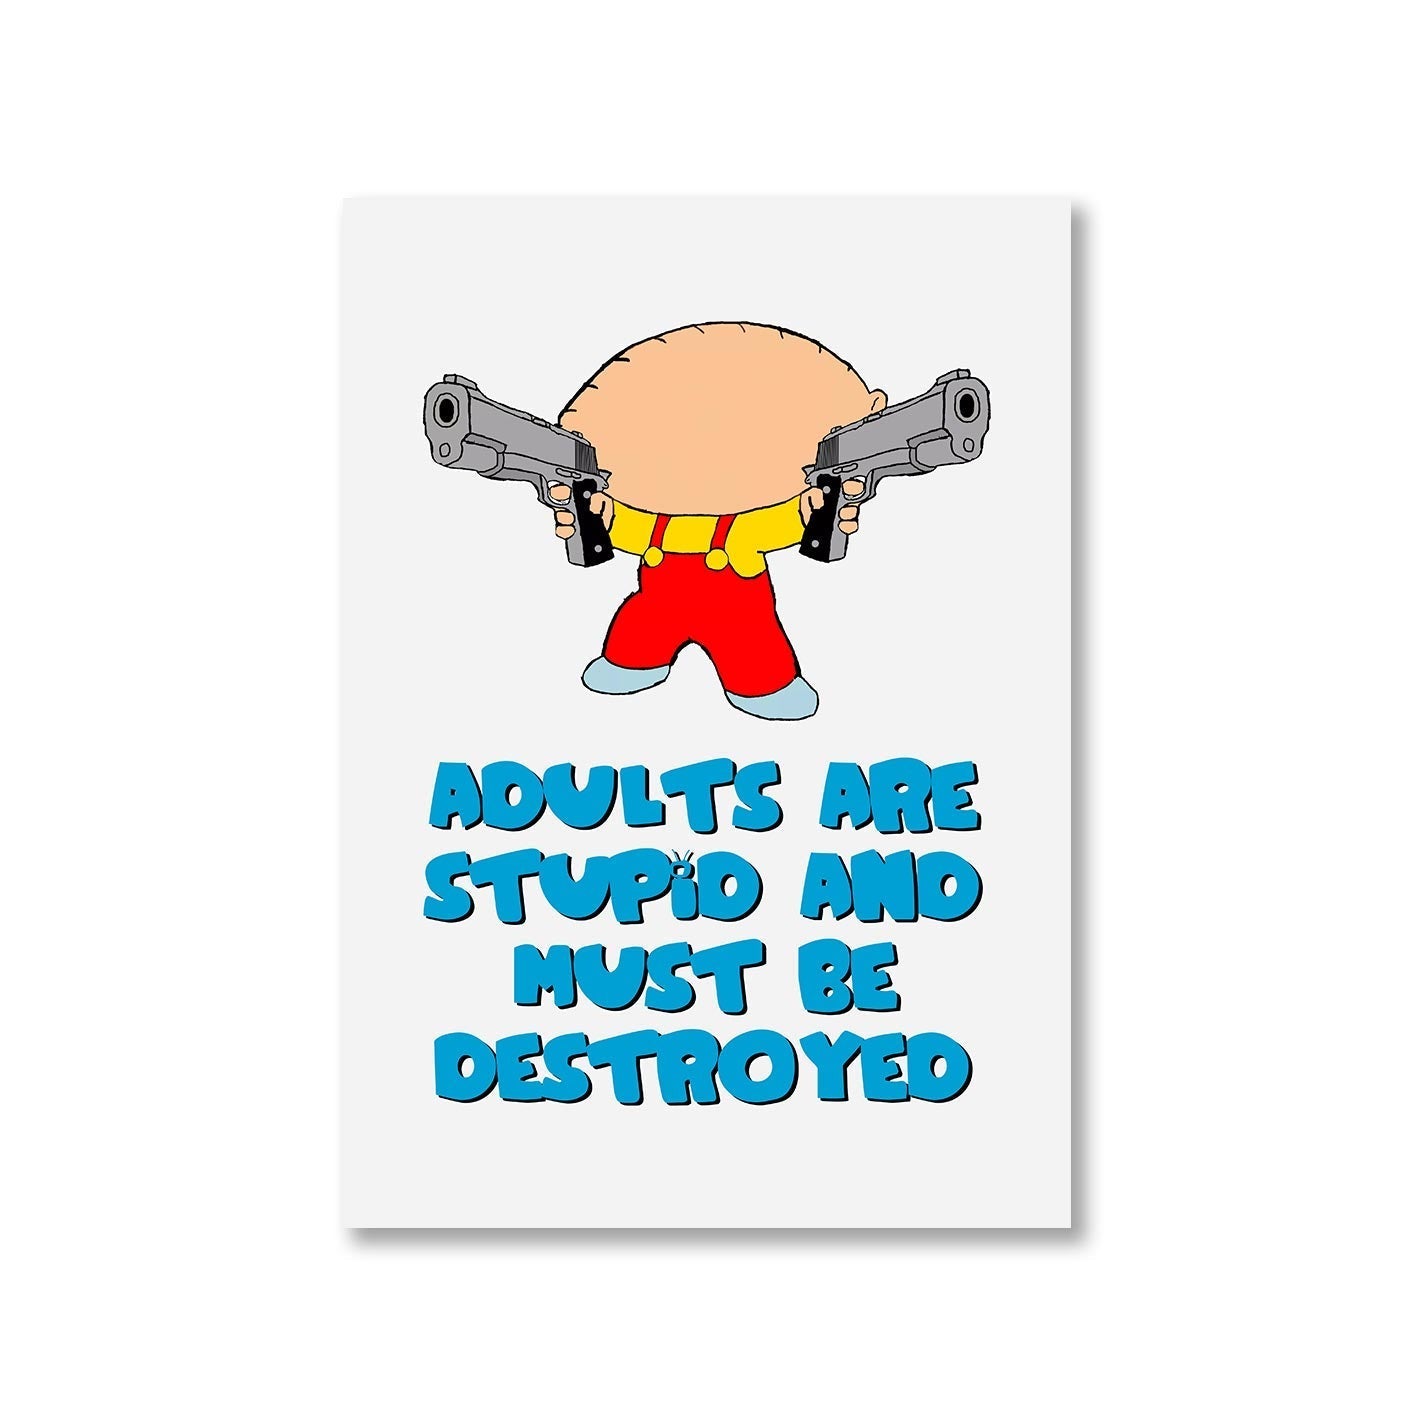 family guy adults are stupid poster wall art buy online united states of america usa the banyan tee tbt a4 - stewie griffin dialogue